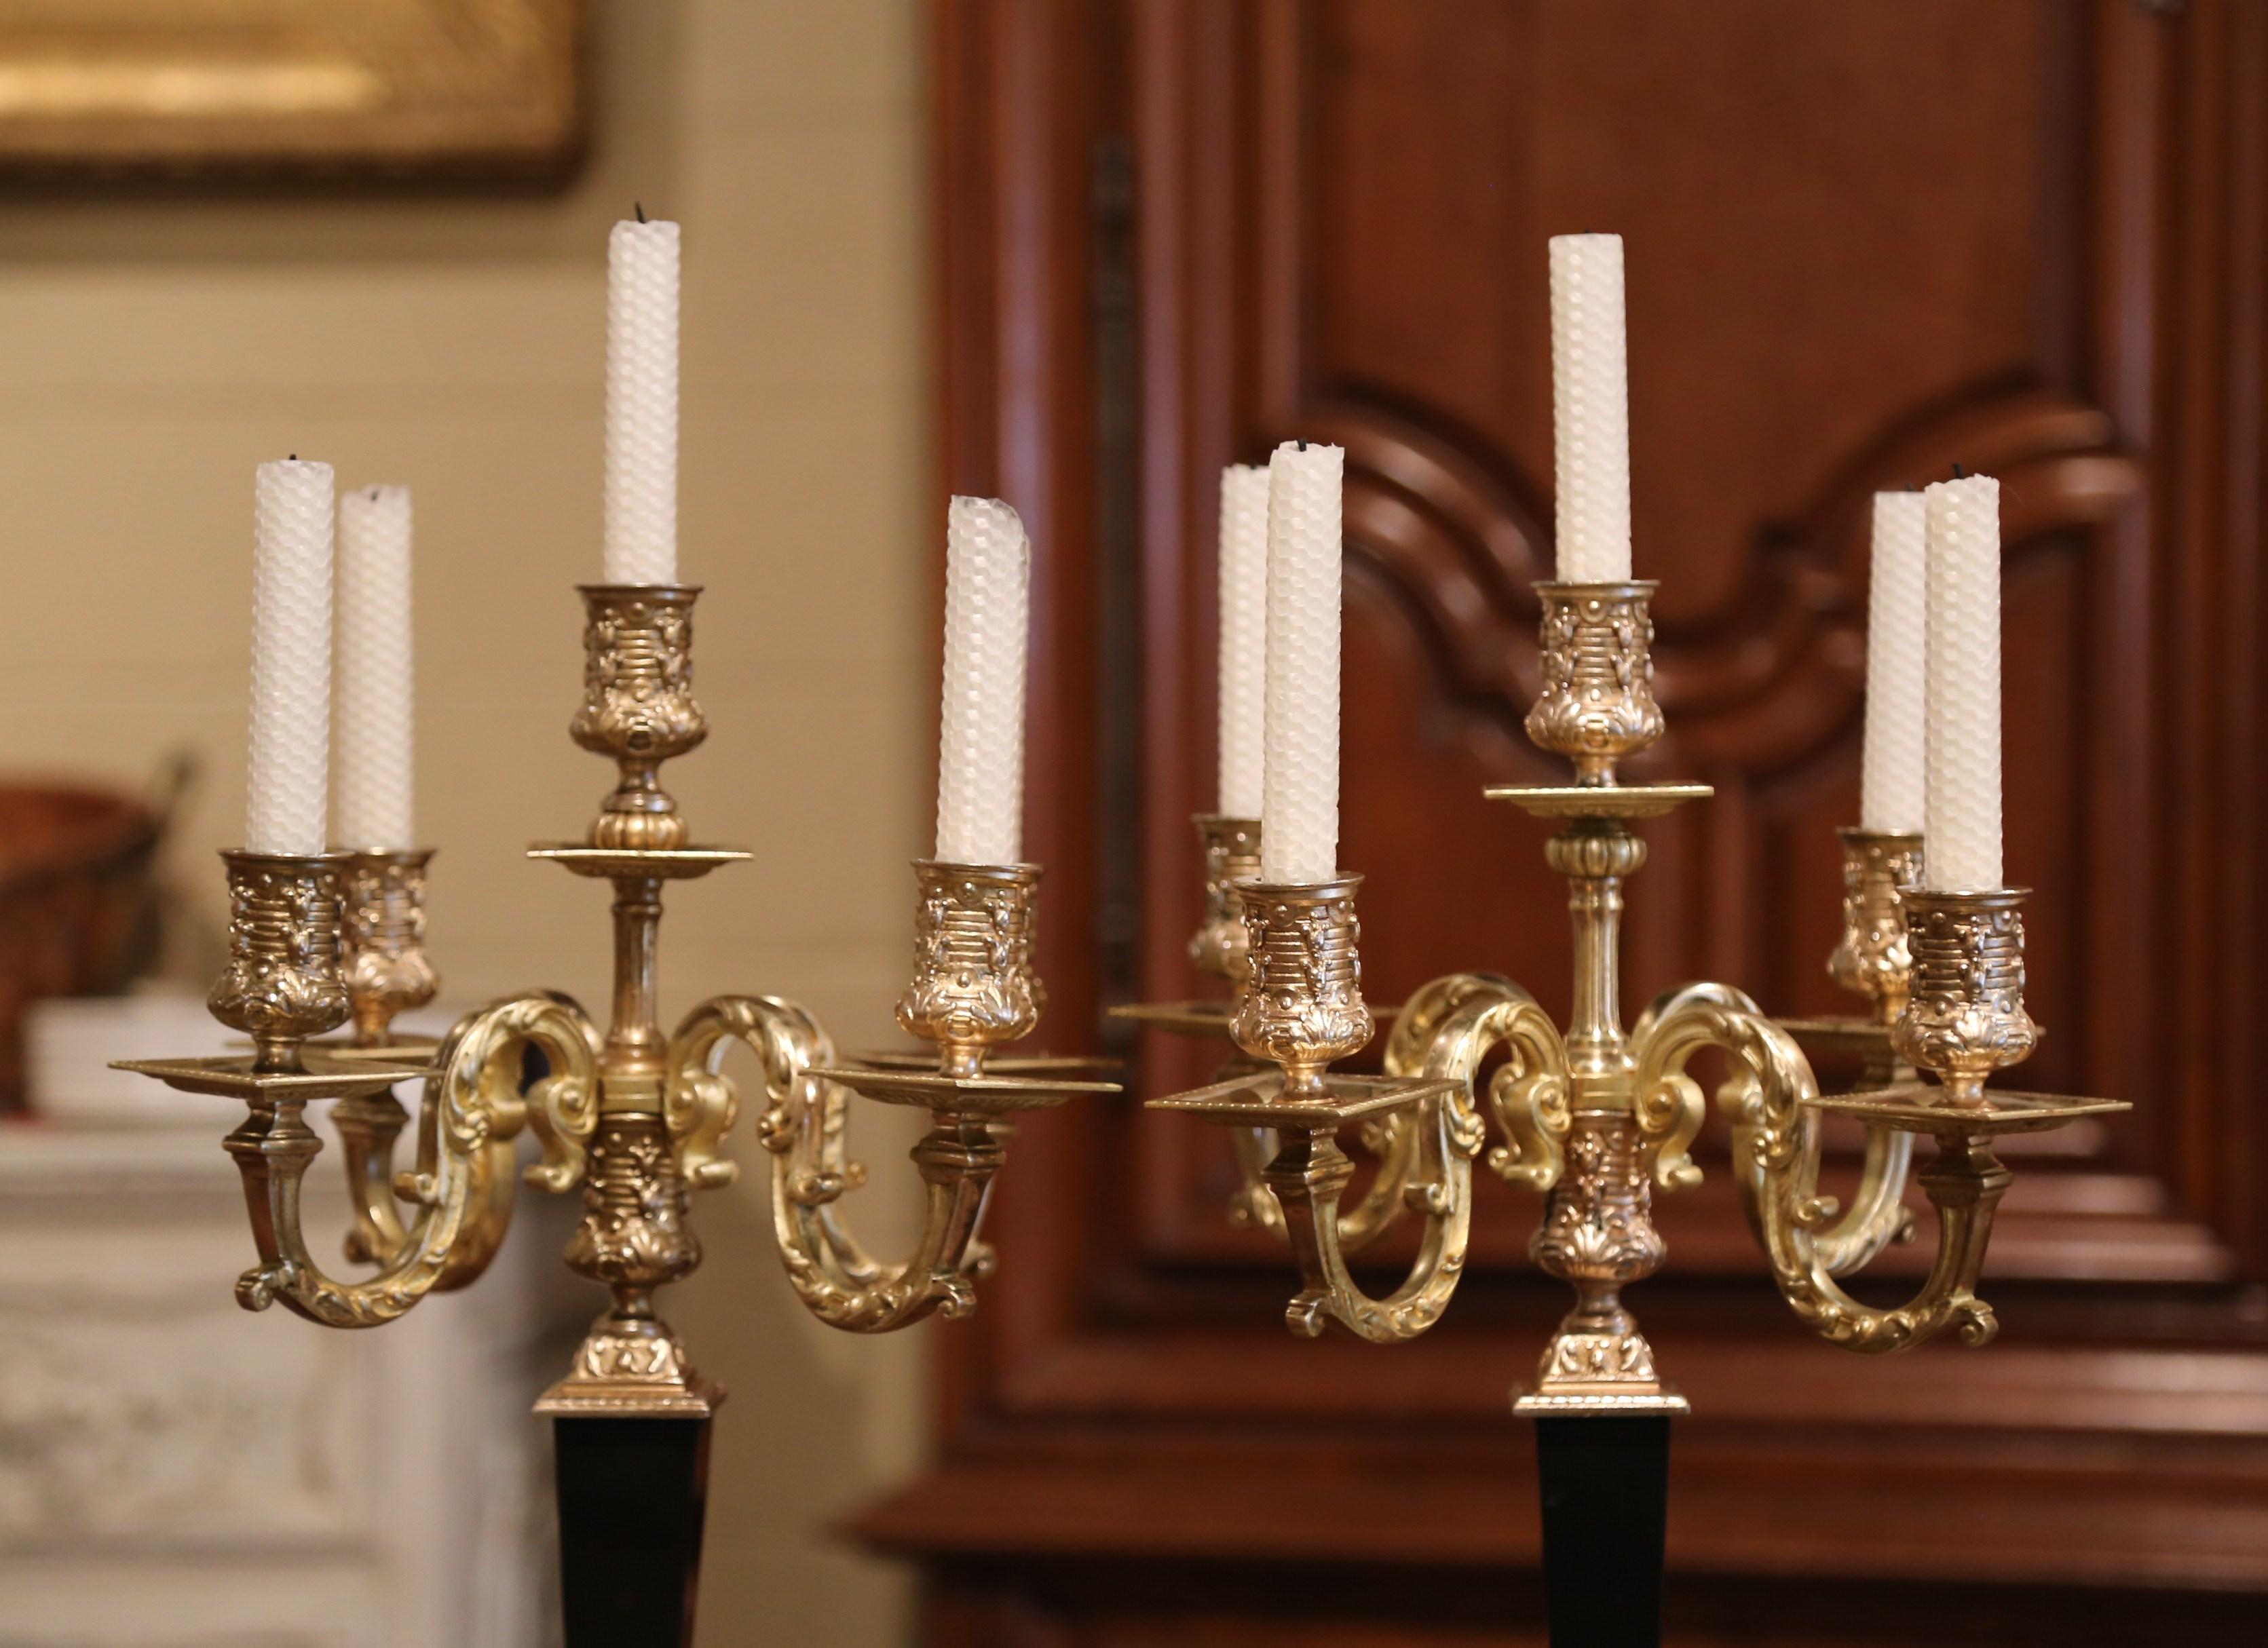 Gilt Pair of 19th Century French Bronze Dore and Black Marble Five-Arm Candelabras